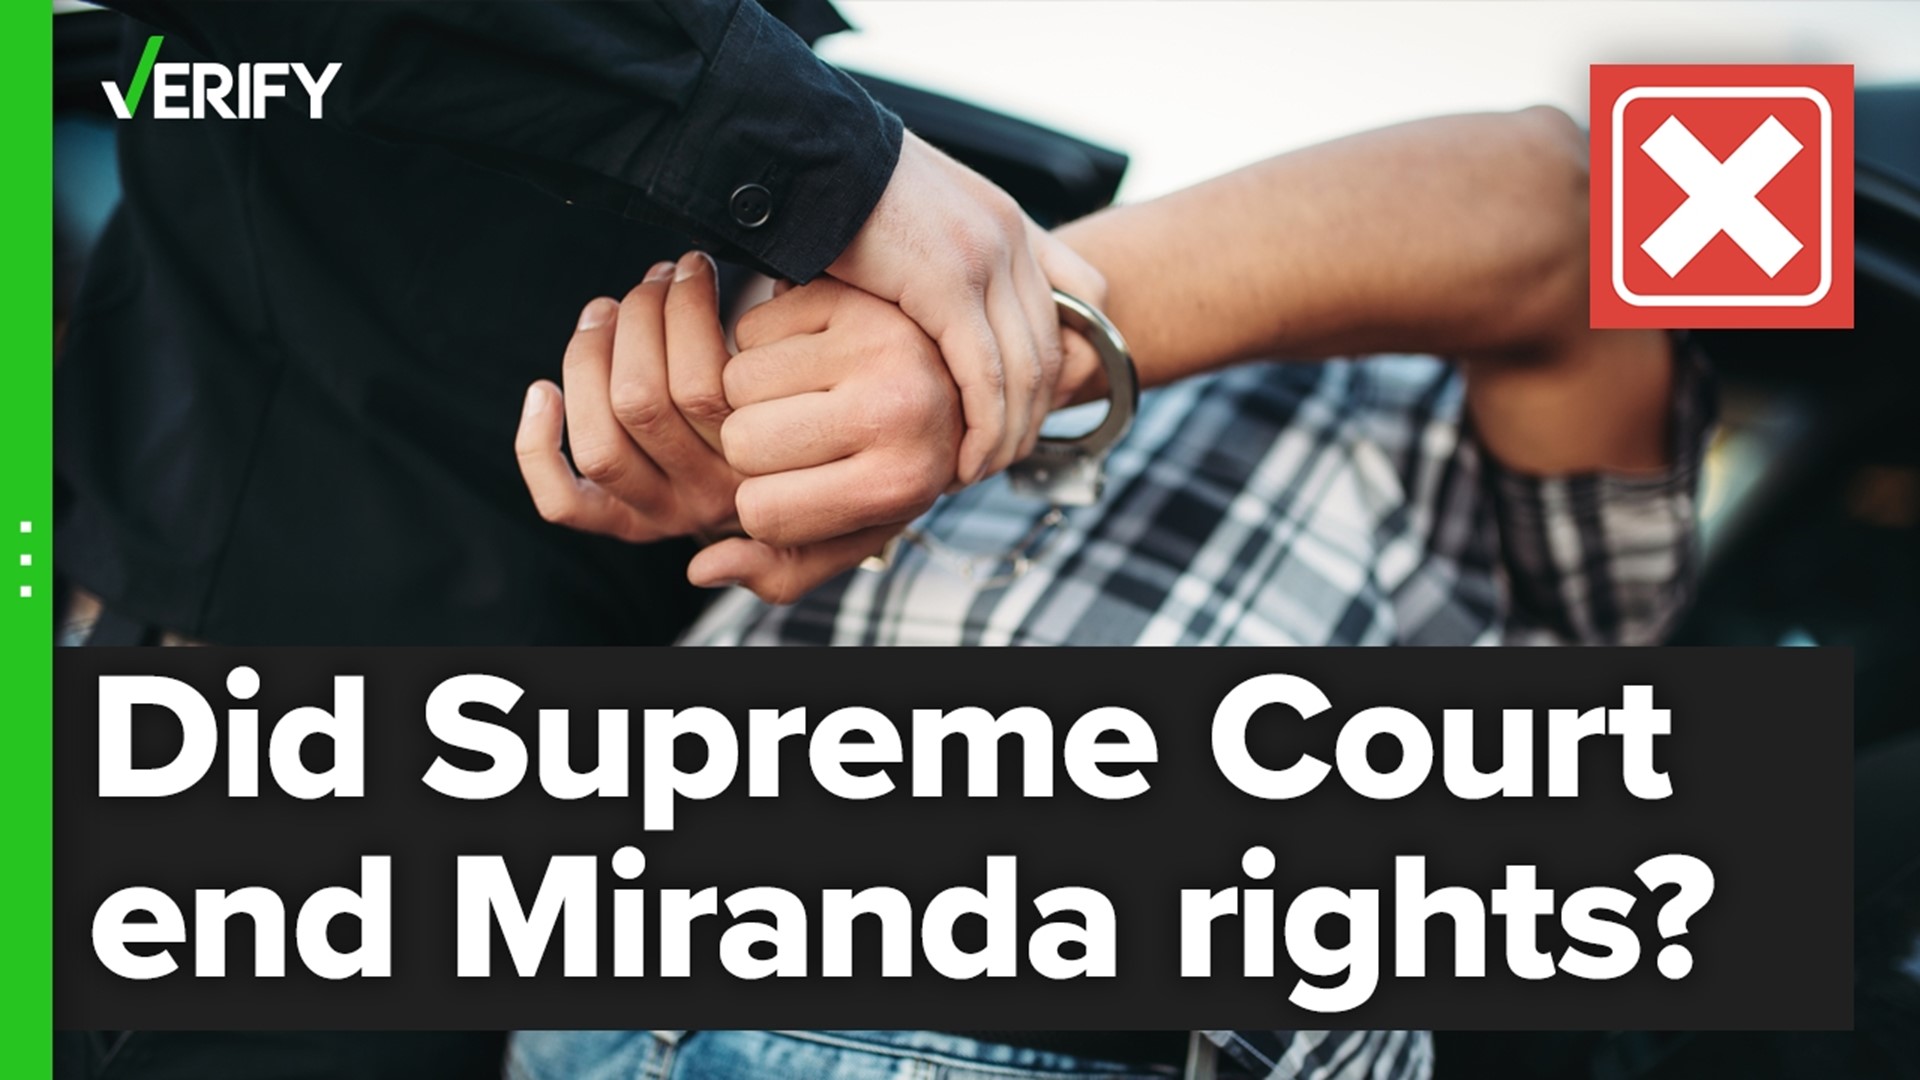 A Supreme Court case involving the “right to remain silent” had people wondering if Miranda rights still apply. They do. Here’s what the ruling actually did.